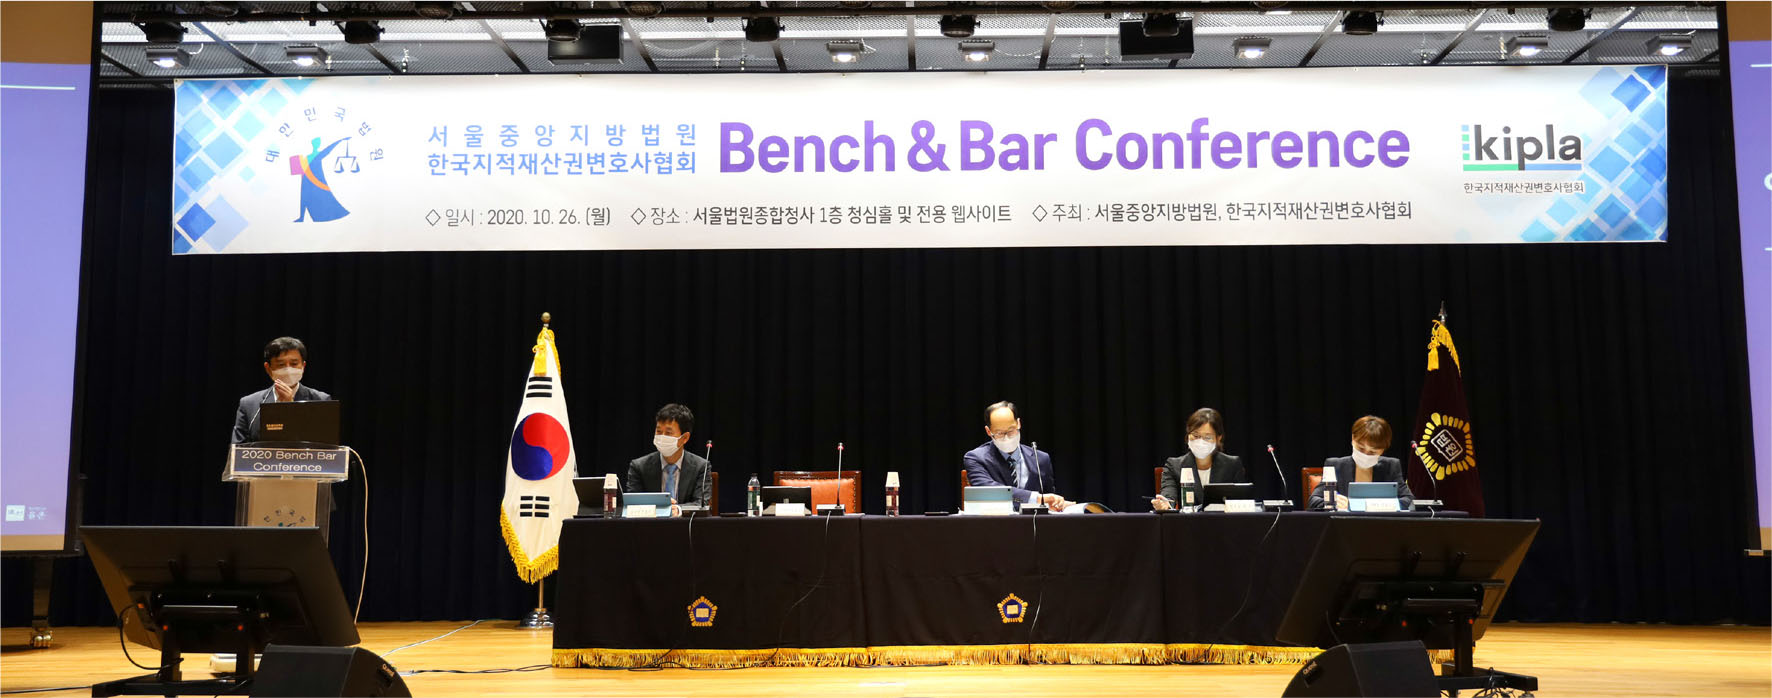 bench bar conference